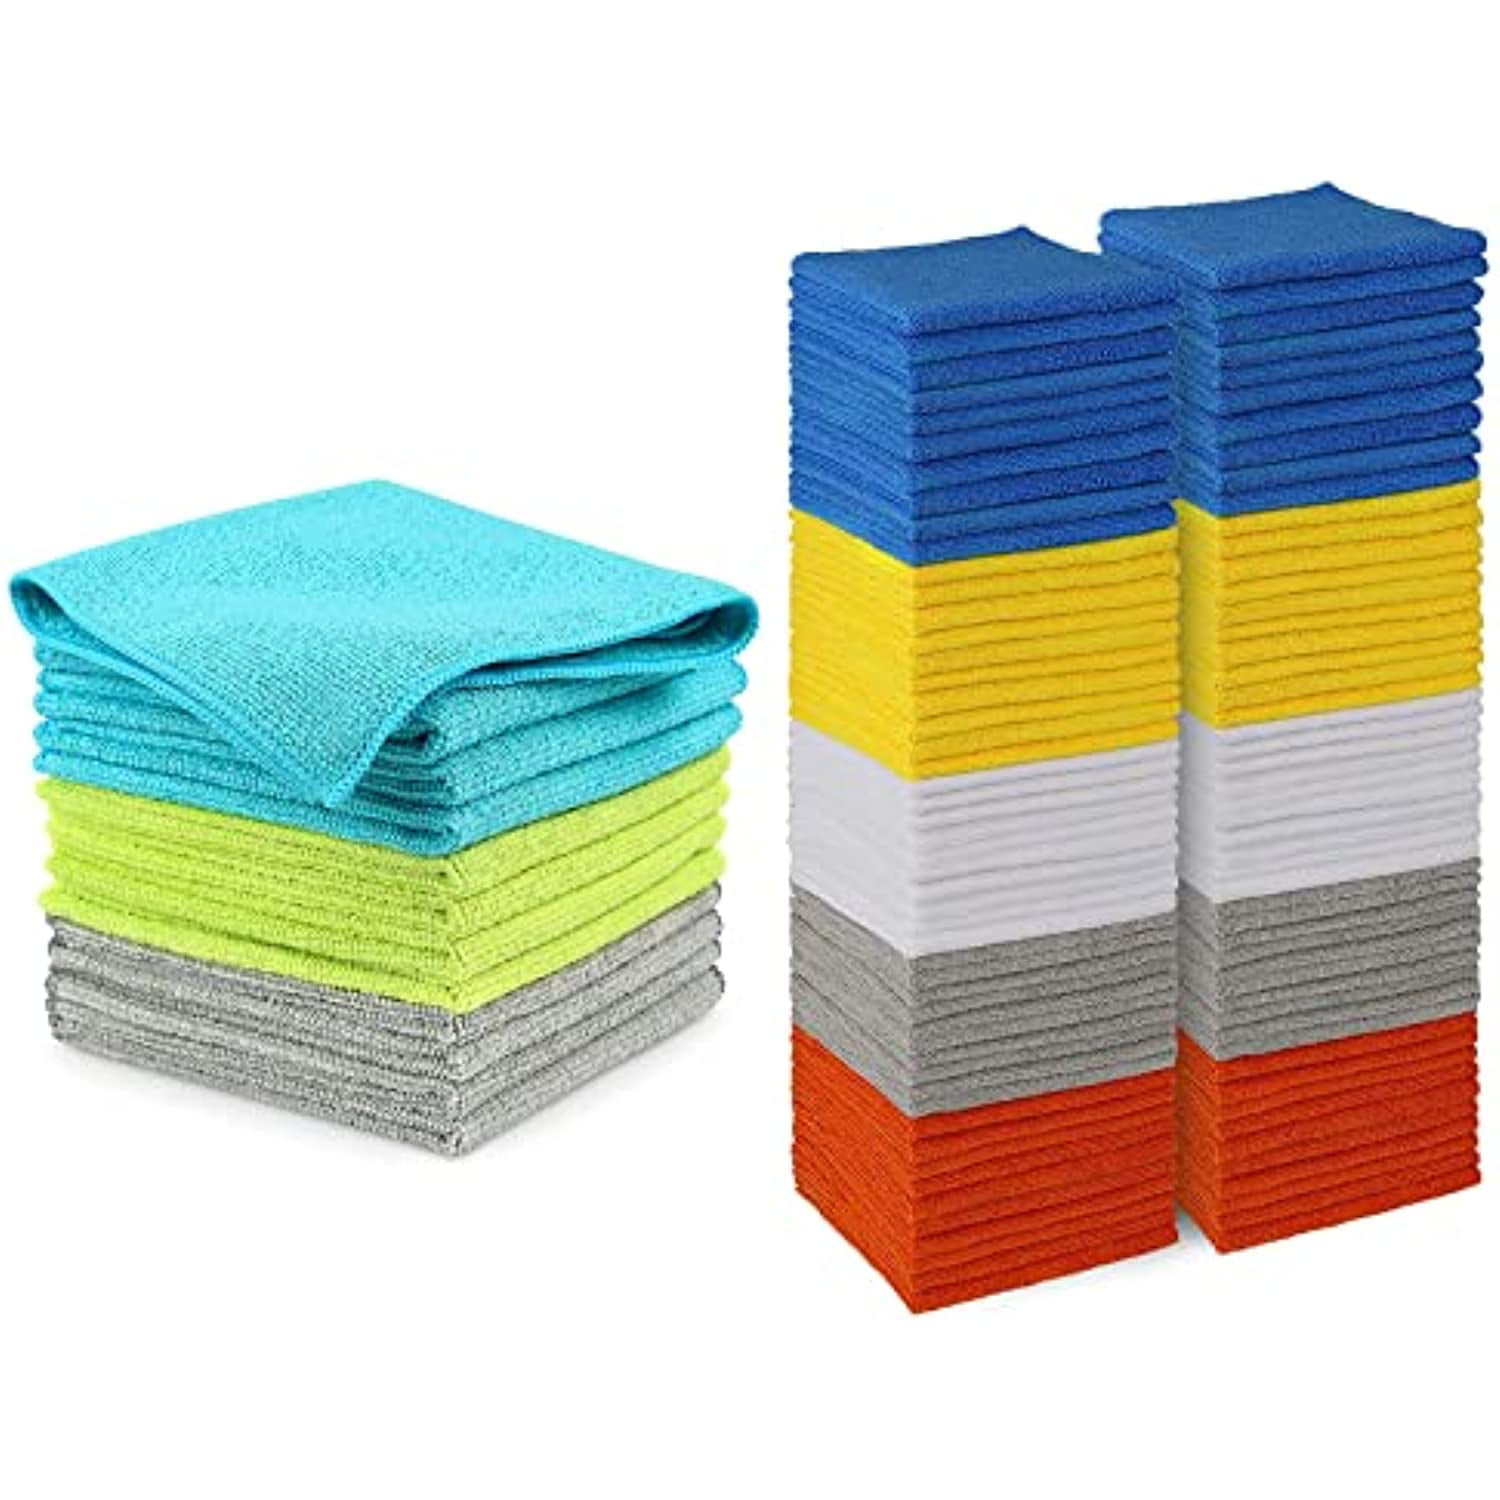  AIDEA Microfiber Cleaning Cloths-100PK, Soft Absorbent Rags for  Cleaning, Lint-Free Towels Cleaning, Microfiber Dusting Cloth for Home,  Kitchen, Car, Window (12in.x12in.) : Health & Household